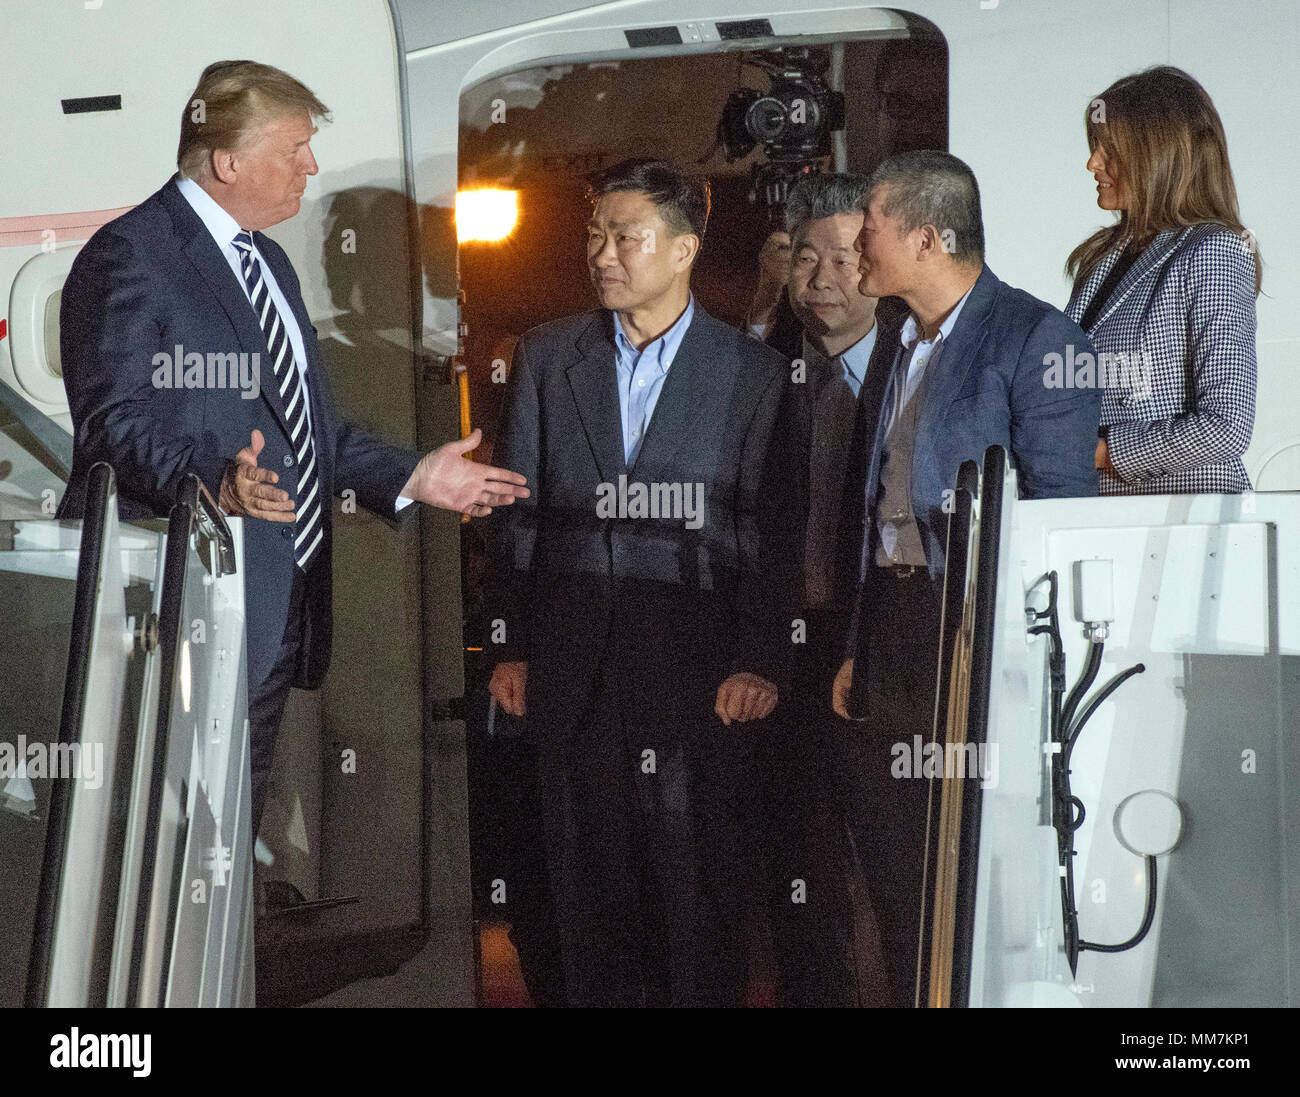 United States President Donald J. Trump welcomes Kim Dong Chul, Kim Hak Song and Tony Kim back to the US at Joint Base Andrews in Maryland on Thursday, May 10, 2018. The three men were imprisoned in North Korea for periods ranging from one and two years. They were released to US Secretary of State Mike Pompeo as a good-will gesture in the lead-up to the talks between President Trump and North Korean leader Kim Jong Un. Credit: Ron Sachs/CNP /MediaPunch Stock Photo